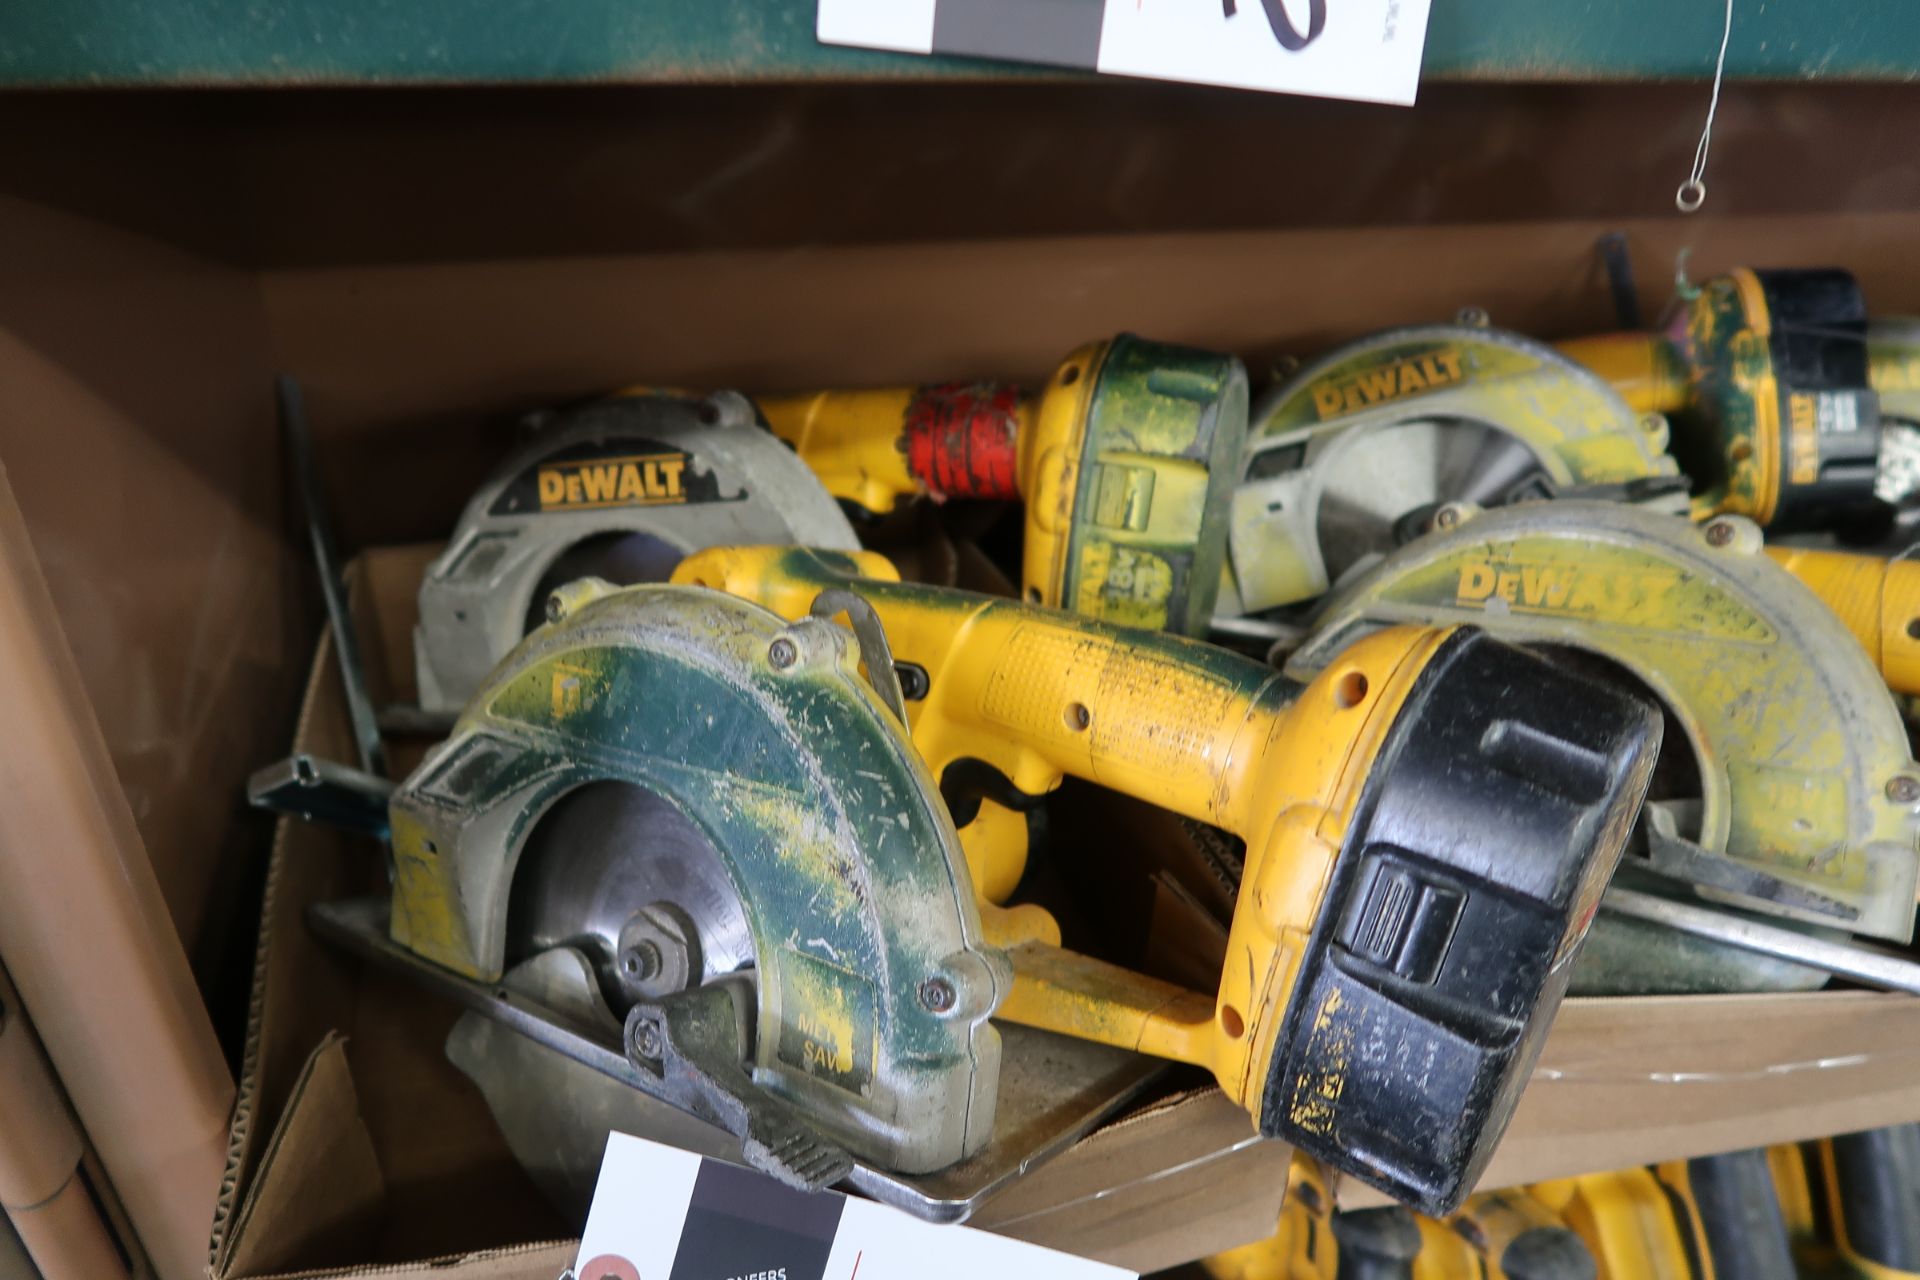 DeWalt 18Volt Cordless Circular Saws (8) (NO CHARGERS OR BATTERIES) (SOLD AS-IS - NO WARRANTY) - Image 2 of 5